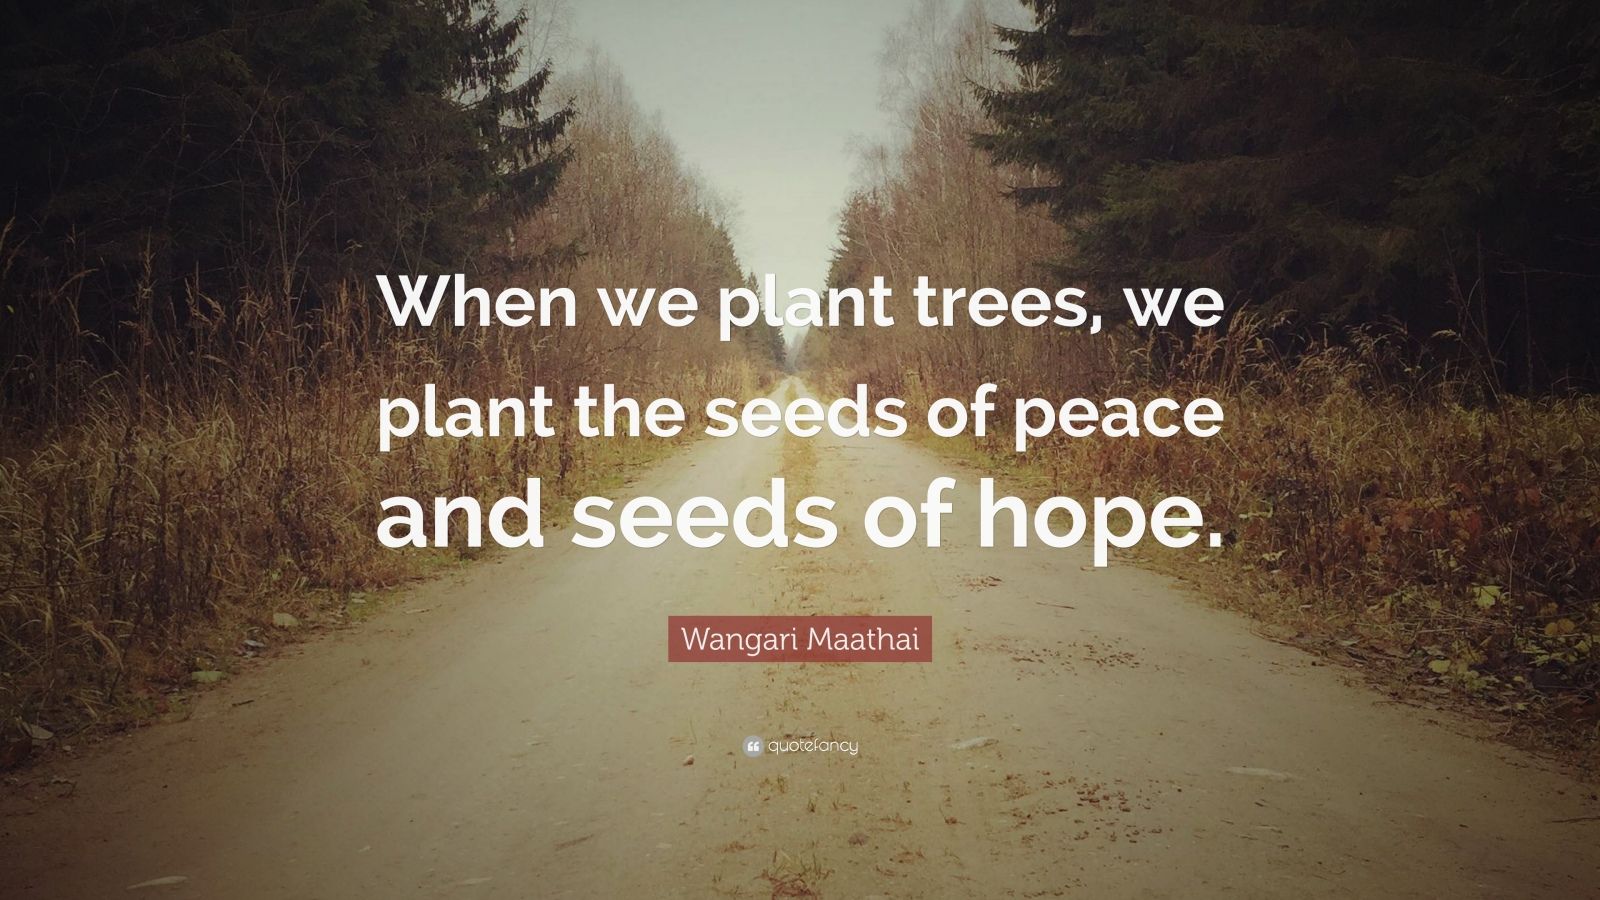 Wangari Maathai Quote “When we plant trees, we plant the seeds of